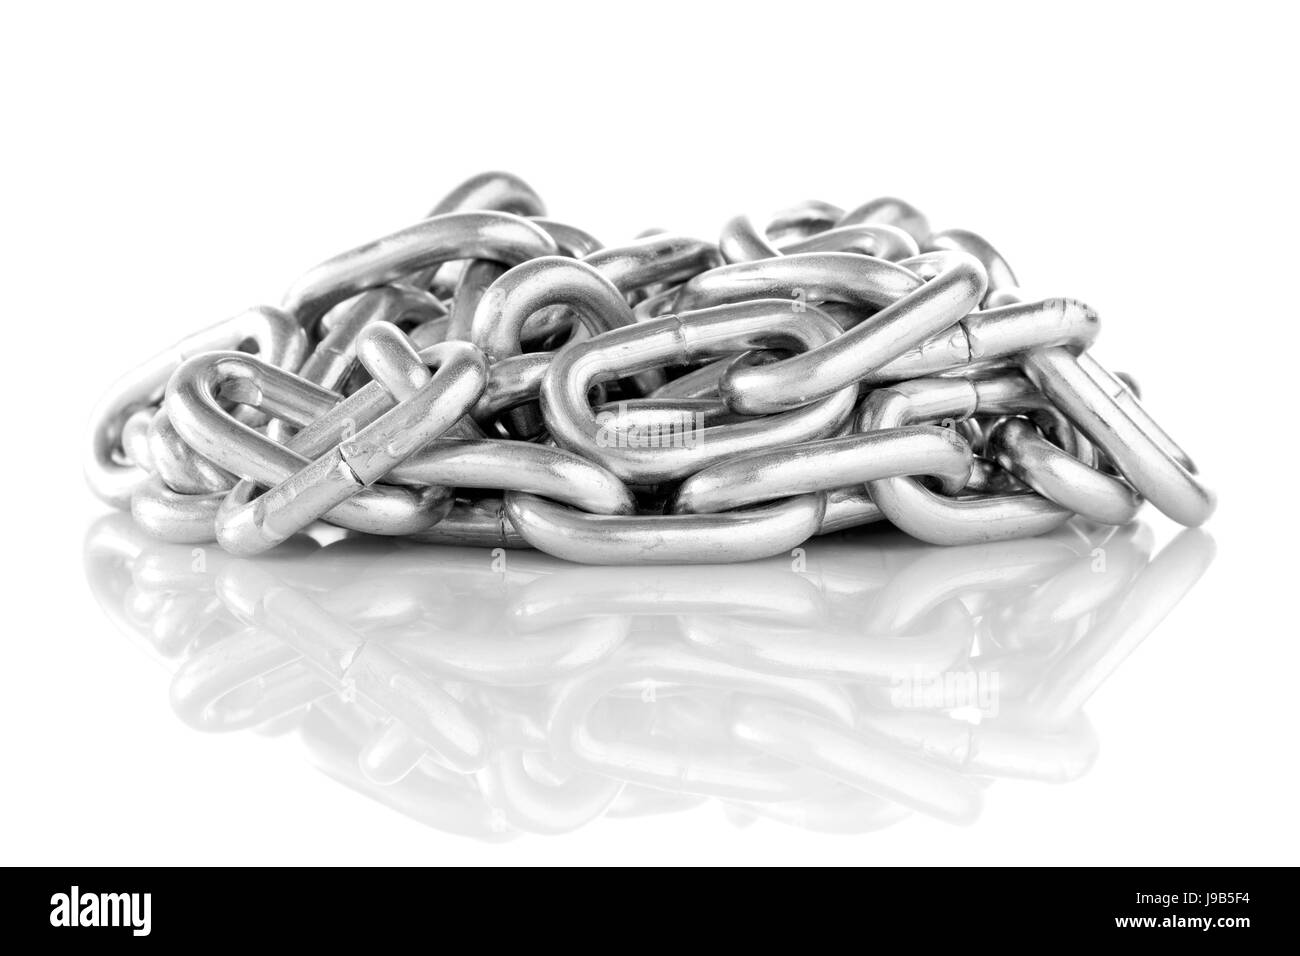 chain, metal, protect, protection, abstract, access, accessibility, security, Stock Photo